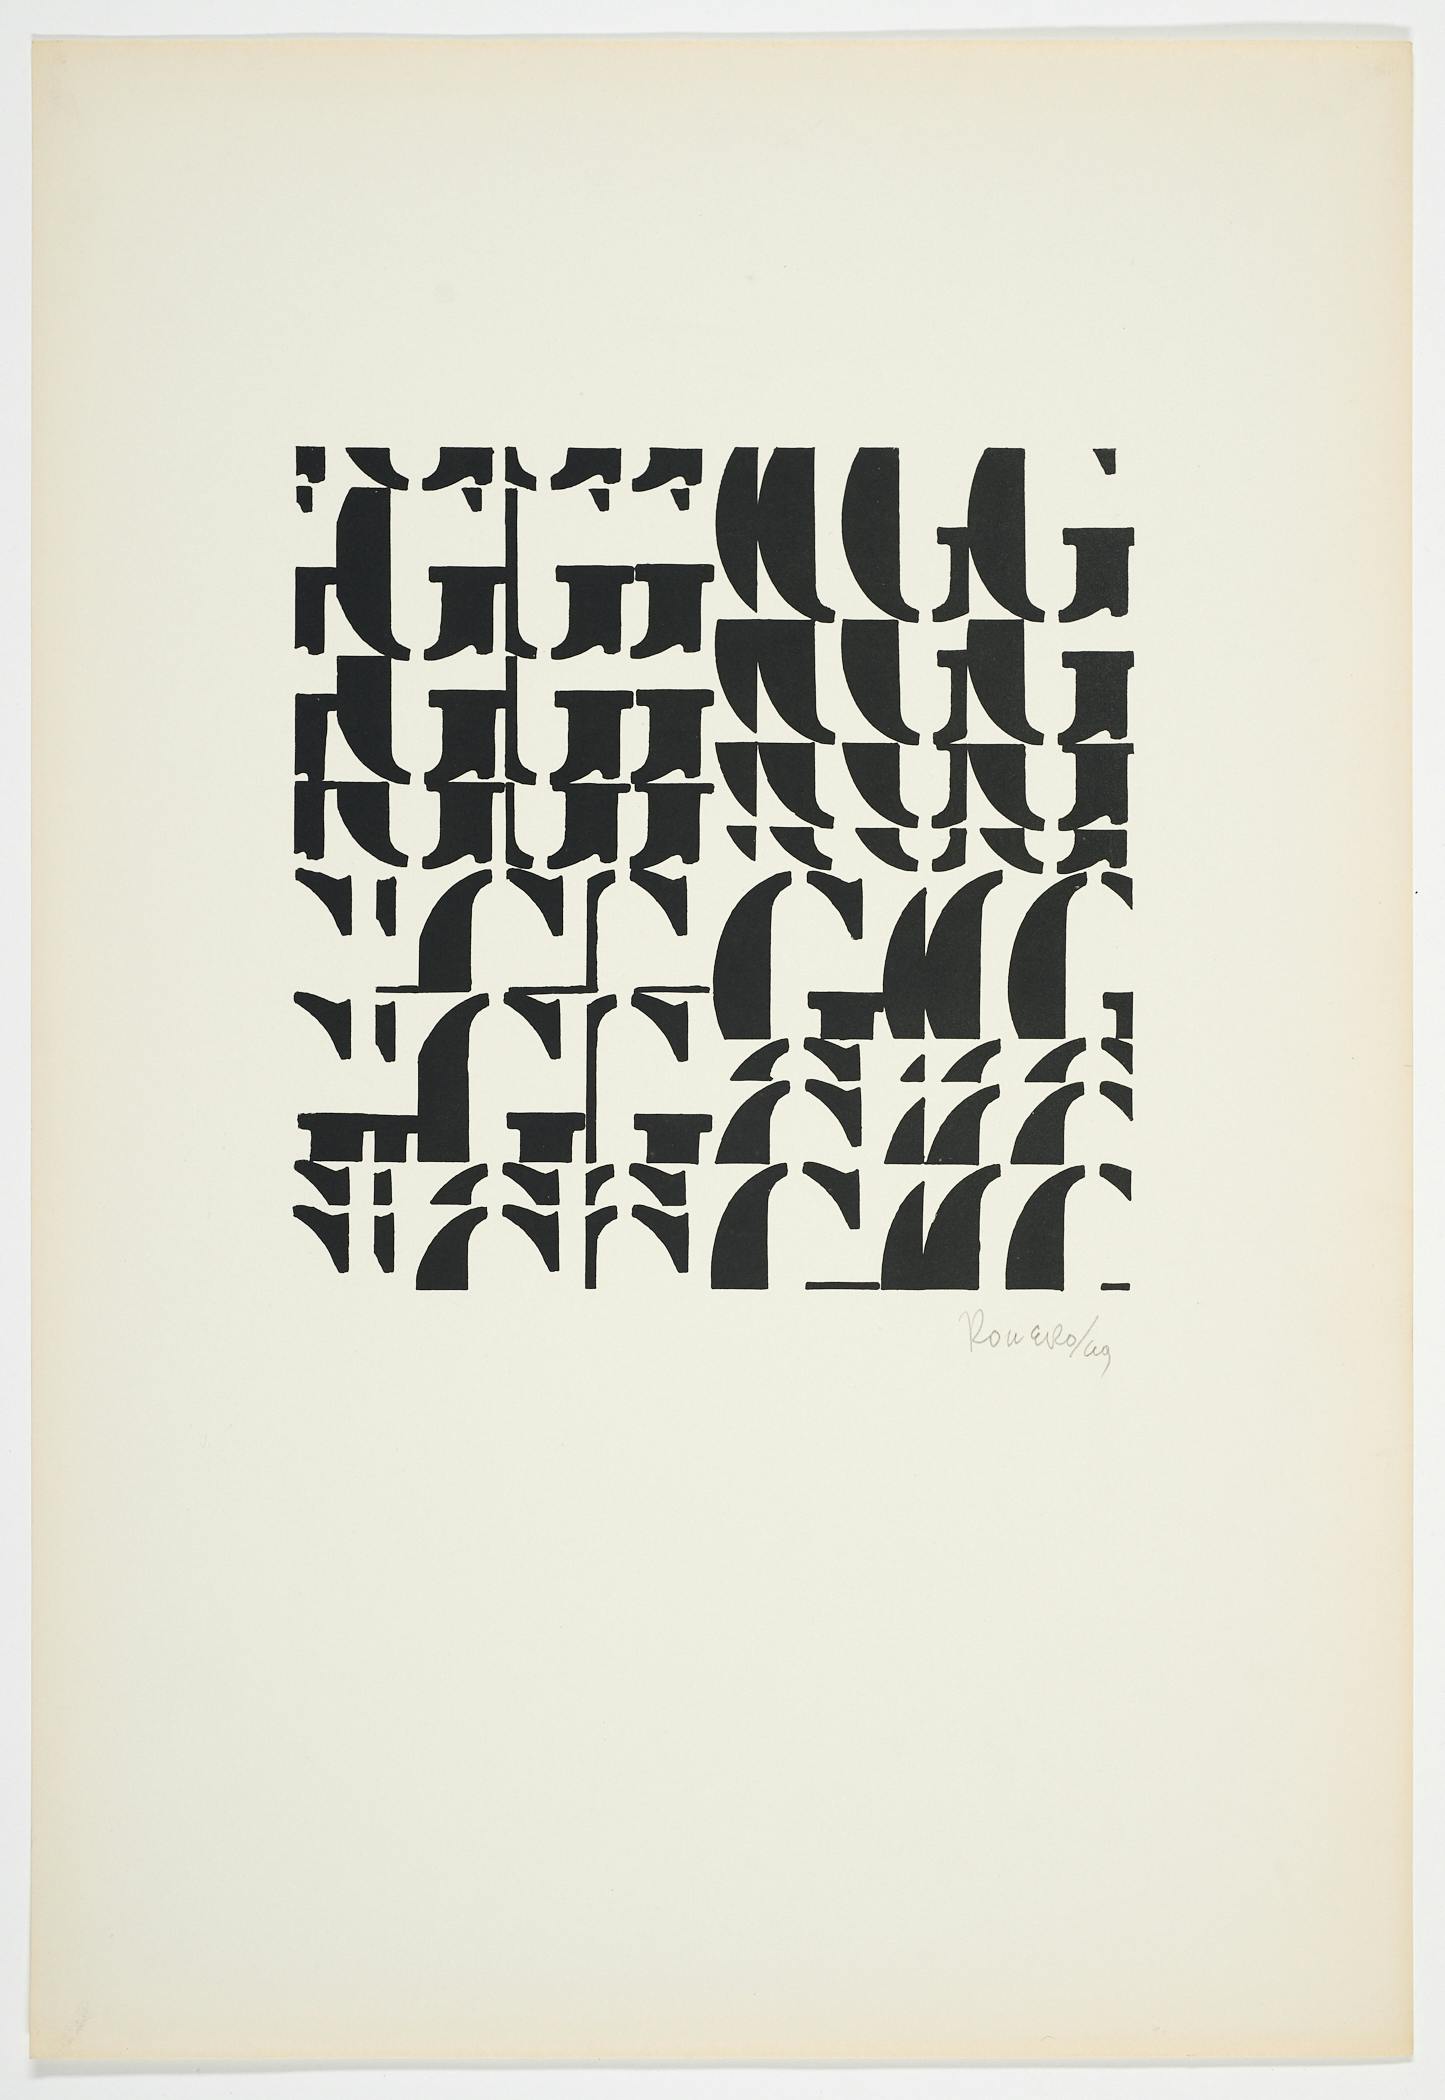 This work on paper features a square of typographic markings on an off-white background. Throughout the square, thin fragments of the letter G are printed in overlaid columns and rows.